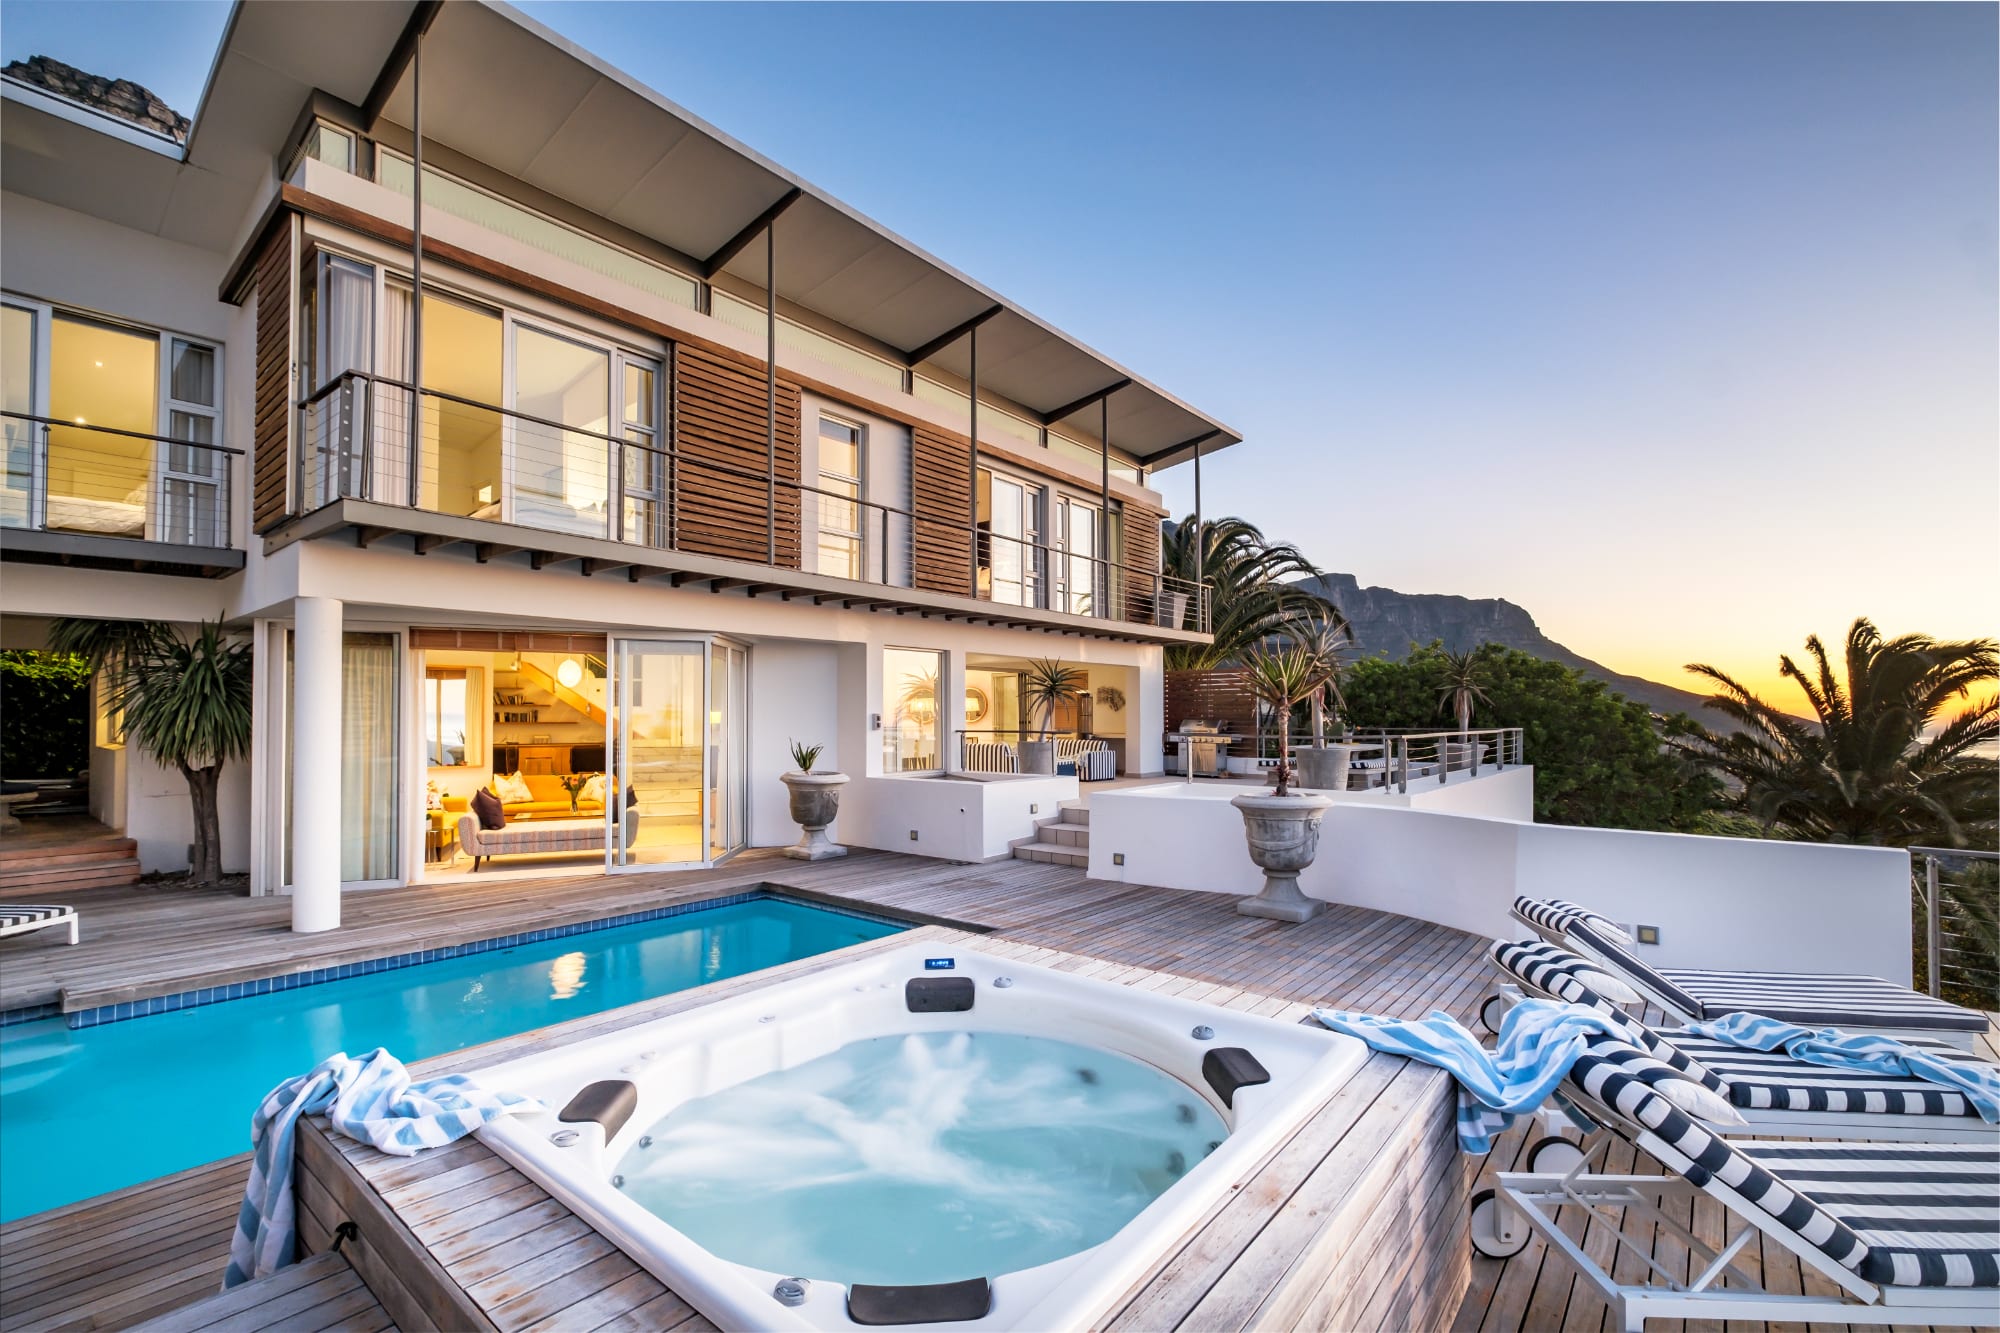 Immaculate Camps Bay Villa w Jacuzzi Views and Pool Villa Grenache